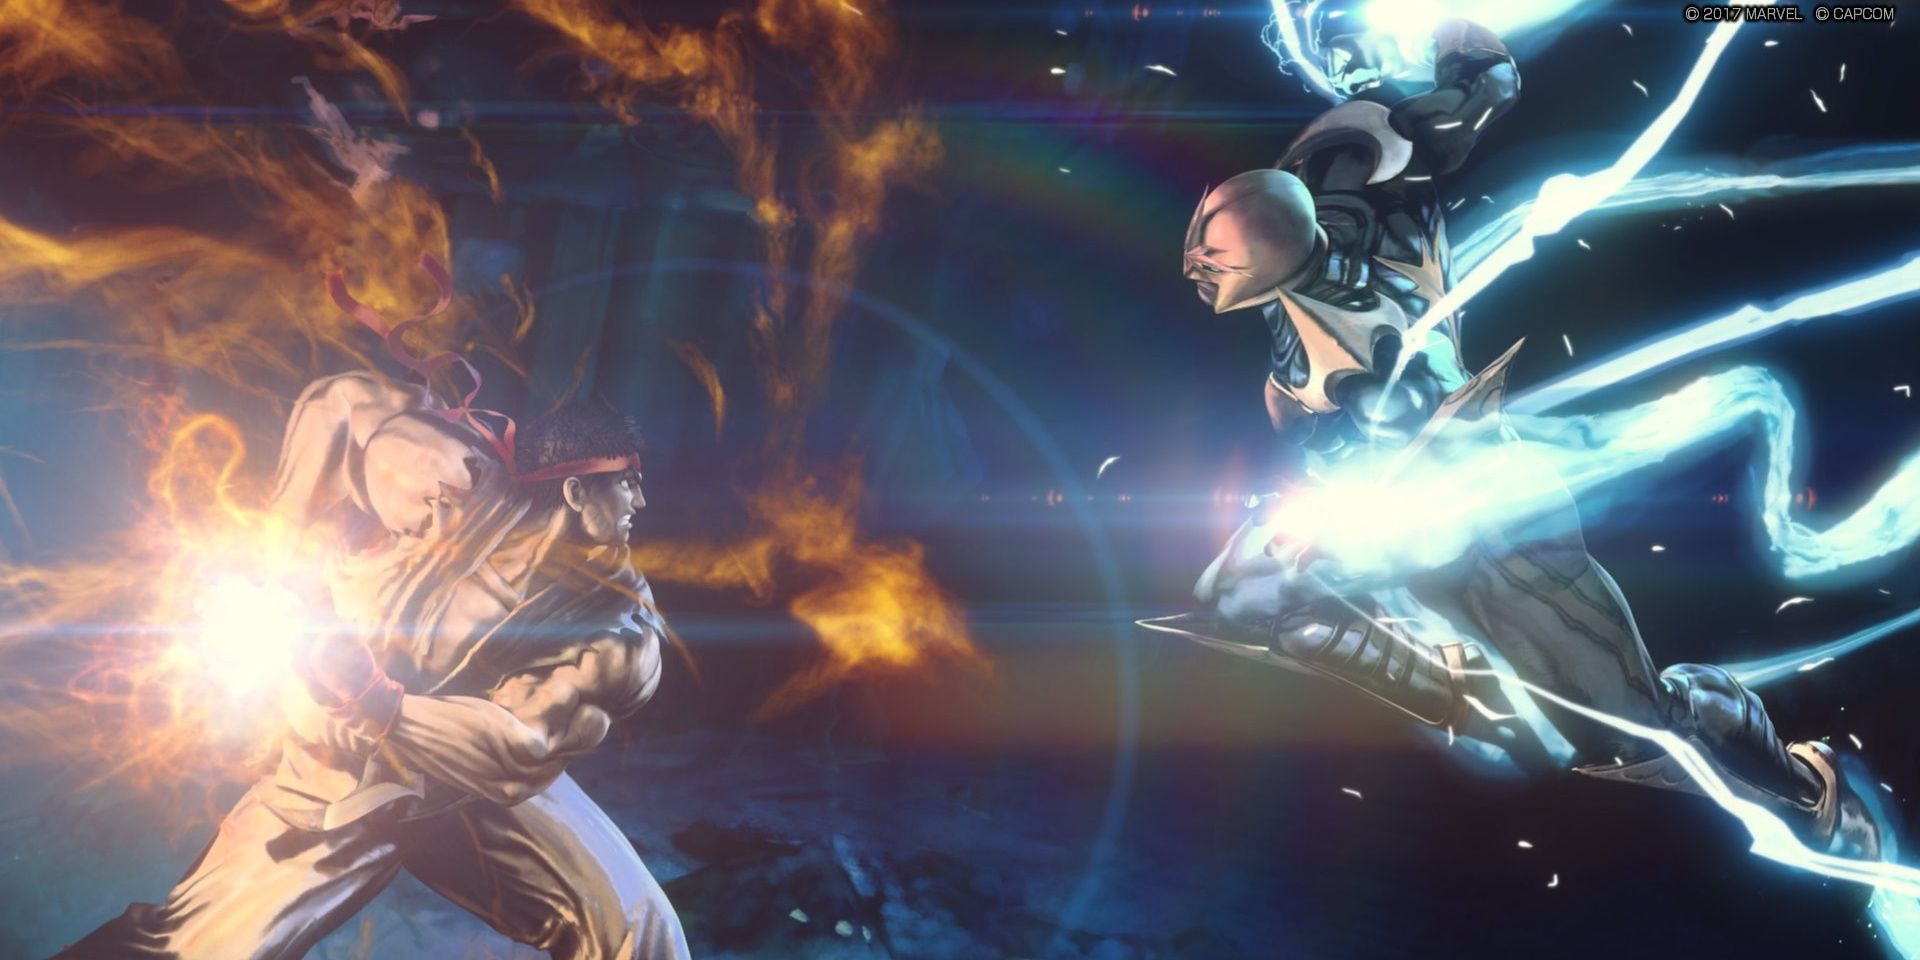 Ryu about to shoot a fireball while Nova comes in for a punch in Ultimate Marvel vs Capcom 3